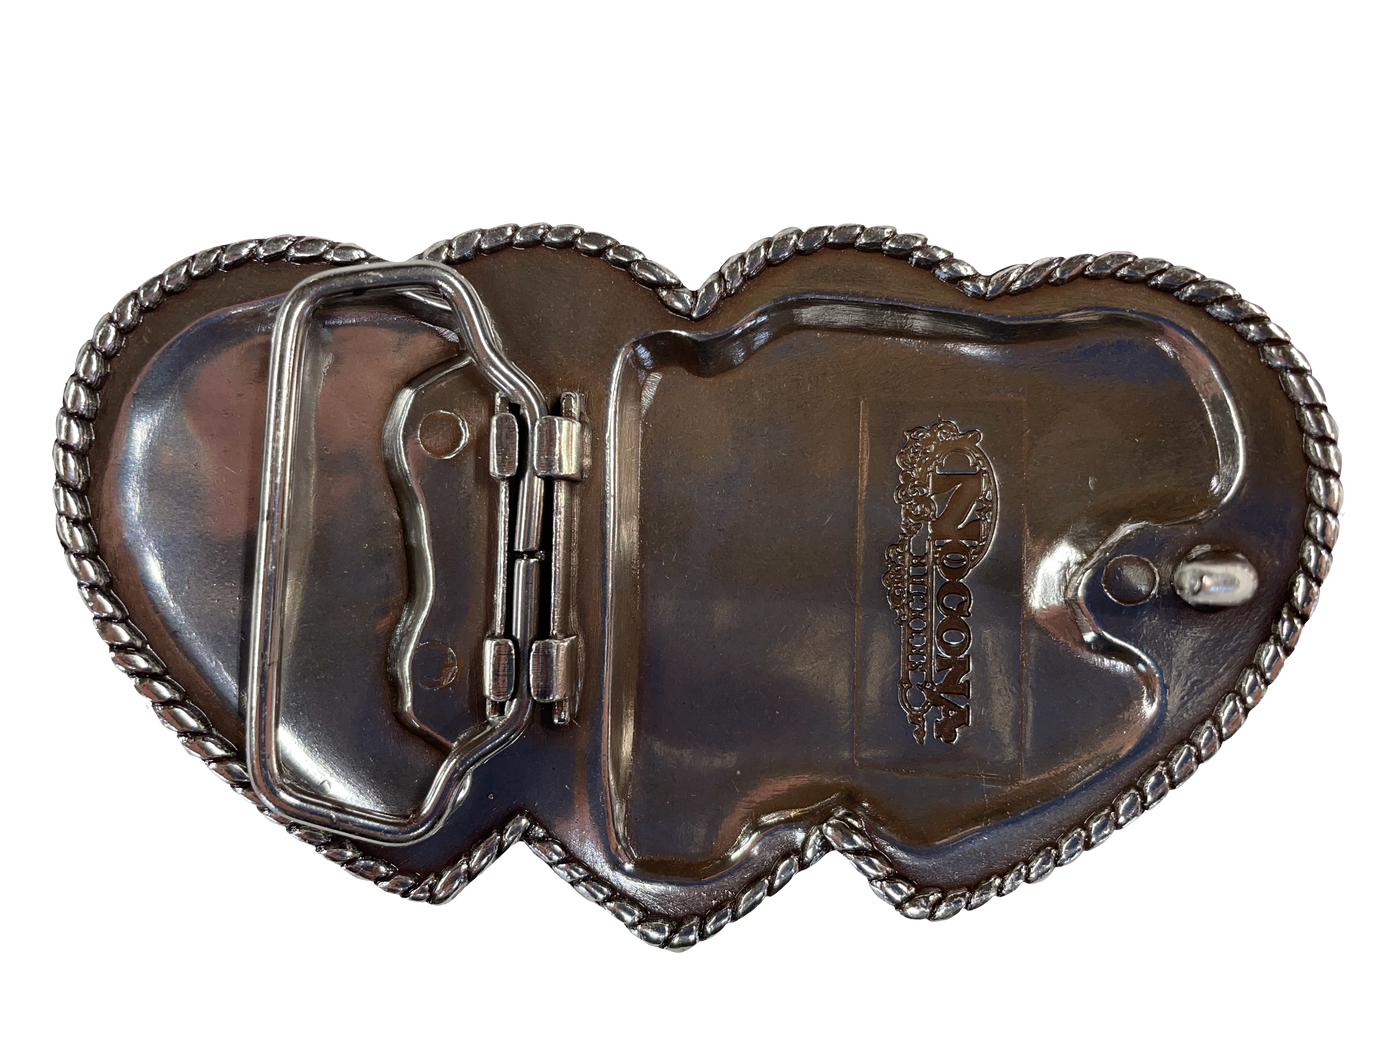 Popular Nocona Three Hearts Buckle in Blazin Roxx collection Dimensions are 1 1/2" tall by 4 1/4" wide Engraved scroll design on hearts with edges lined in rhinestones Sold online and in our shop in Smyrna, TN, just outside of Nashville. back view